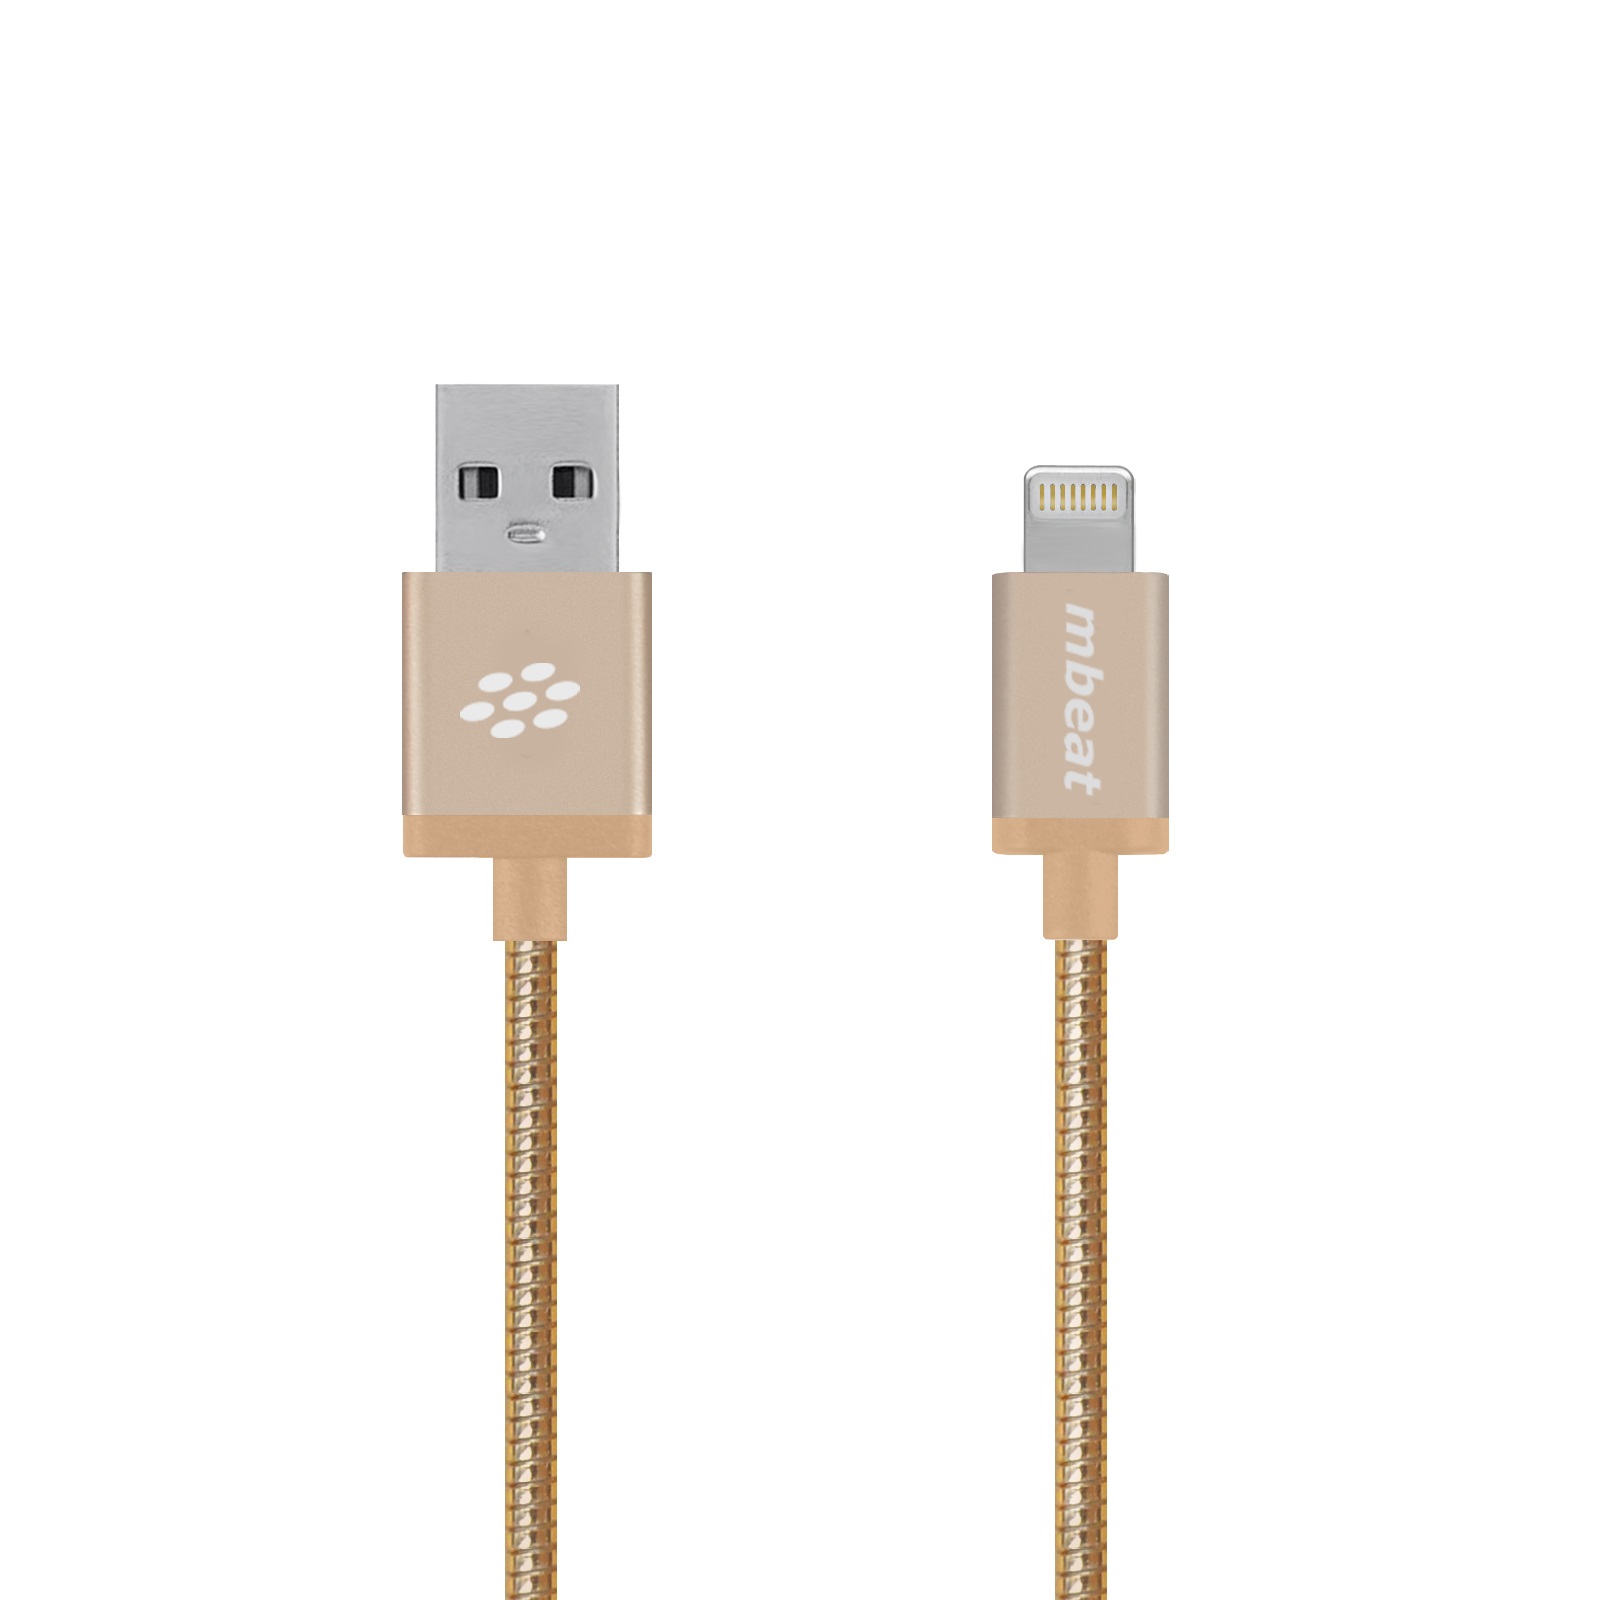 mbeat® 'Toughlink'1.2m Lightning Fast Charger Cable - Gold/Durable Metal Braided/MFI/Apple iPhone X 11 7S 7 8 Plus XR 6S 6 5 5S iPod iPad Mini Air